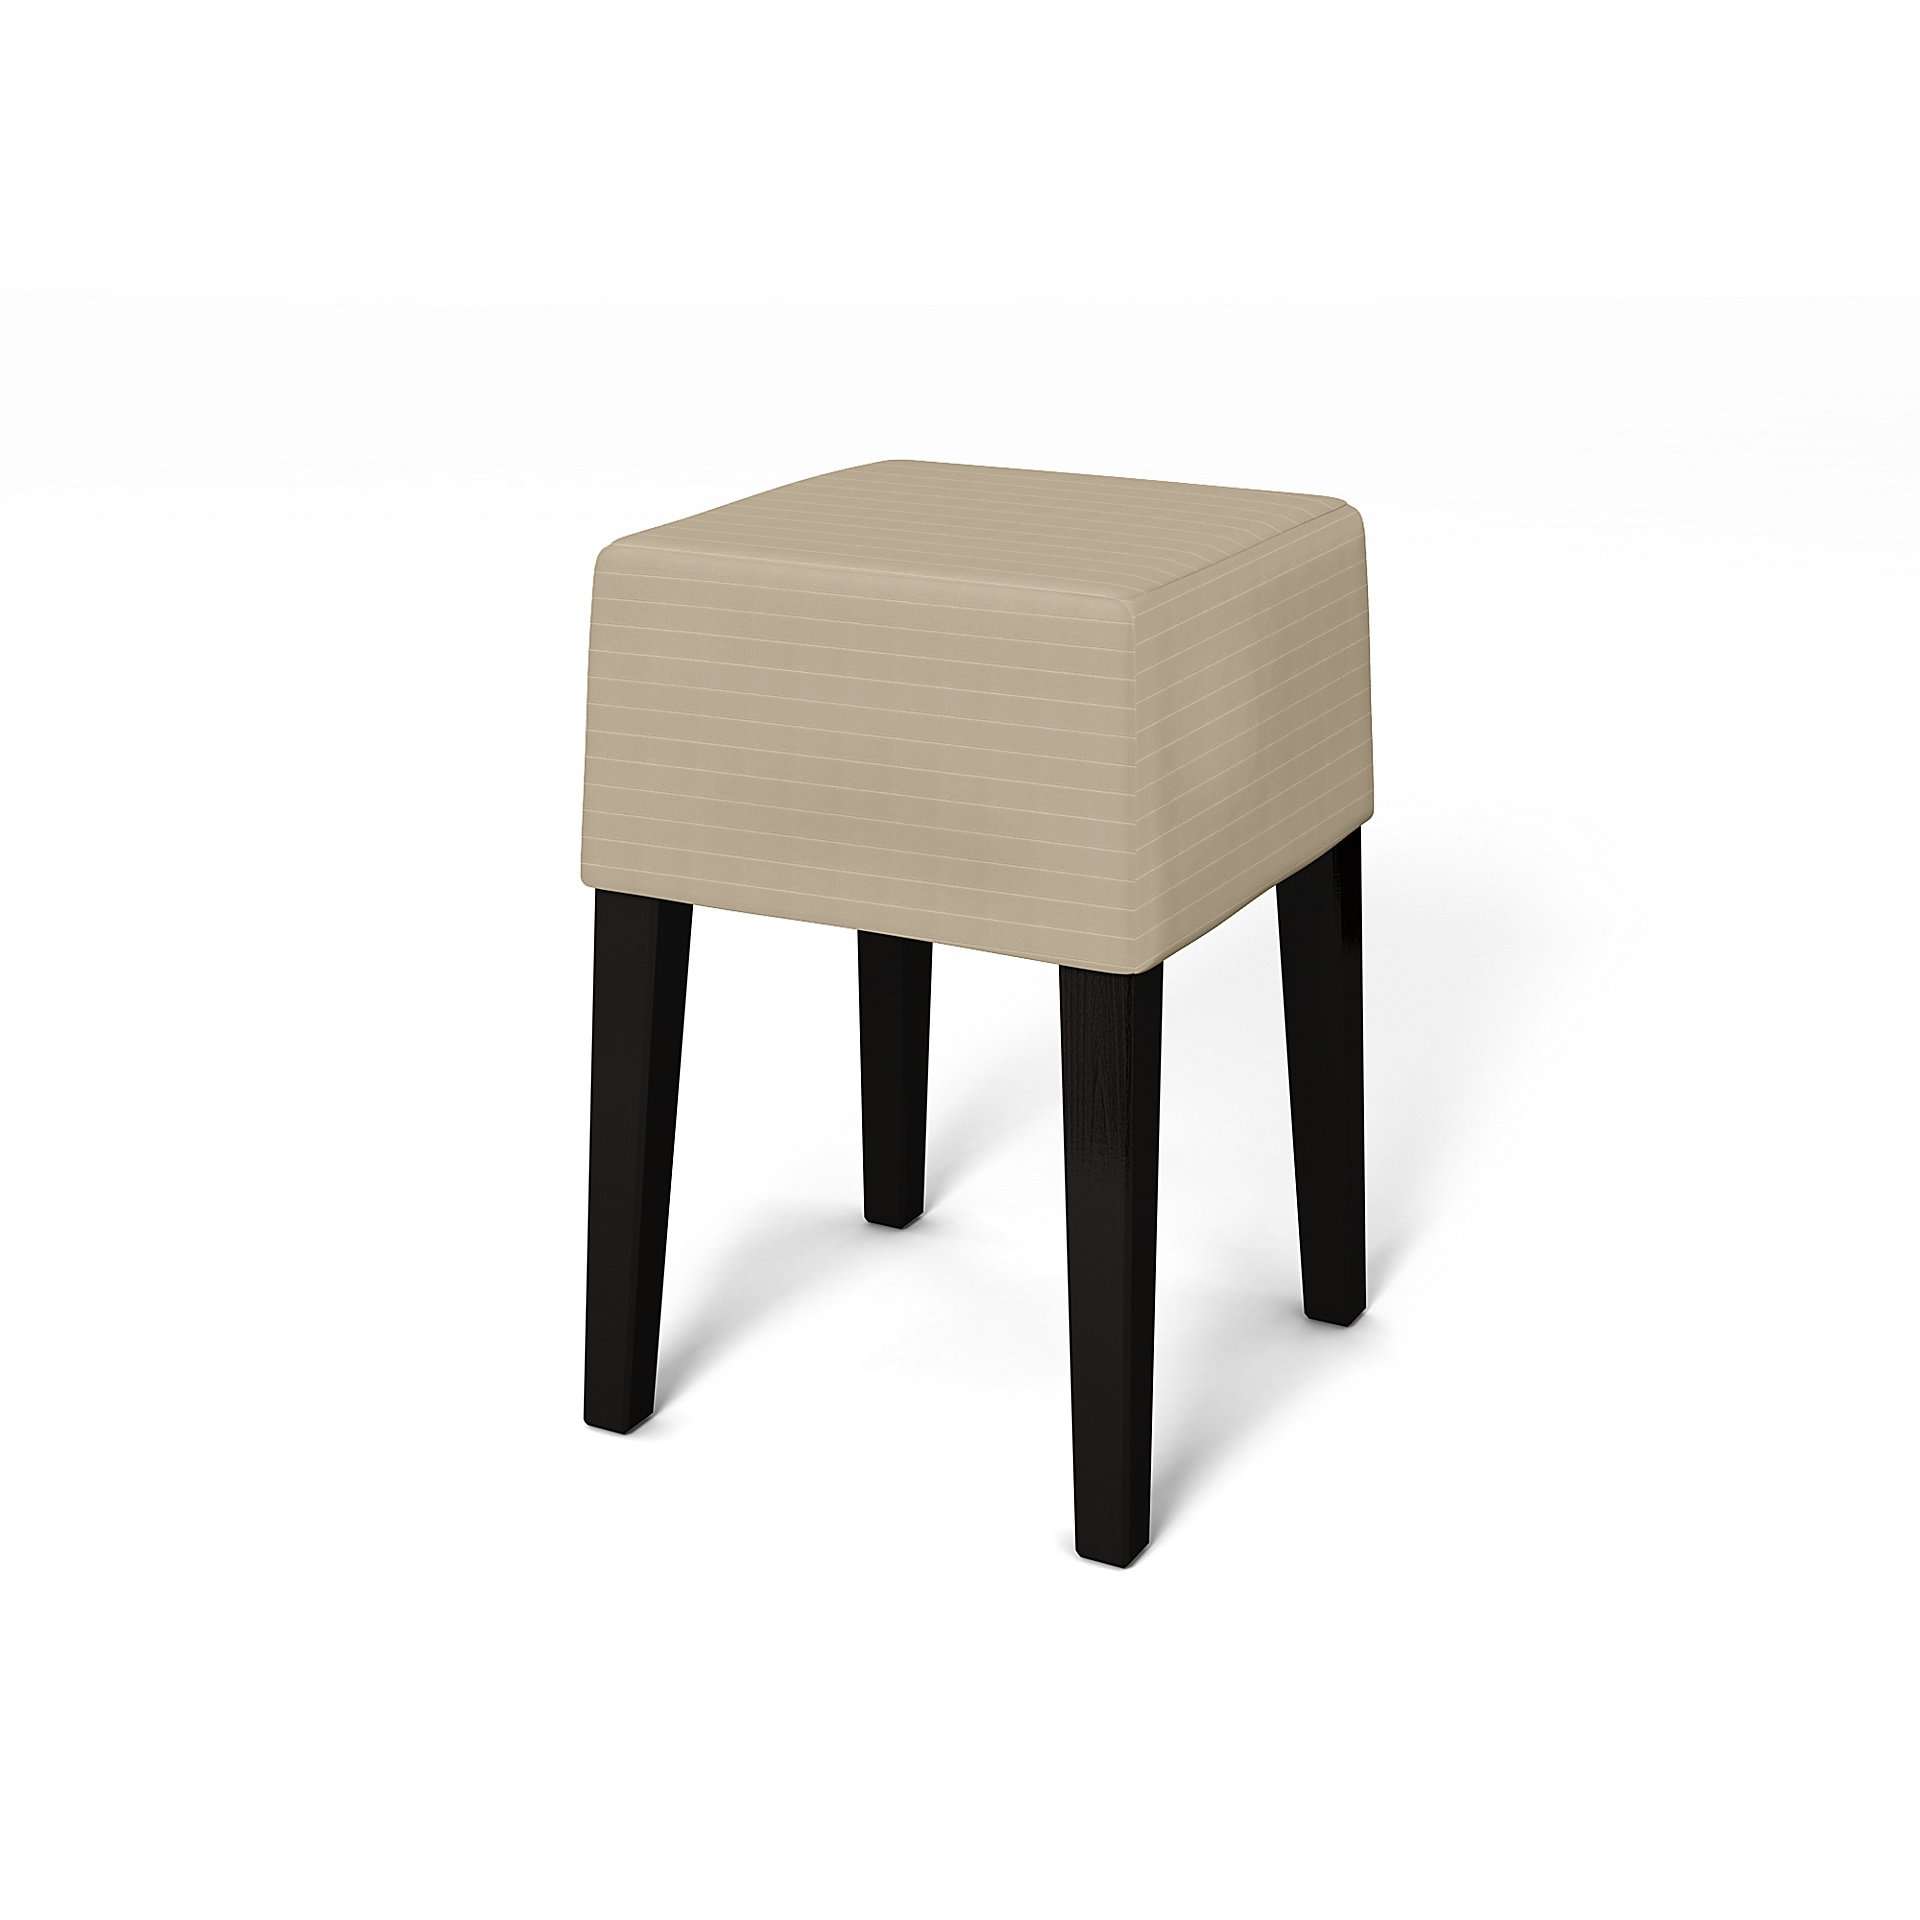 IKEA - Nils Stool Cover, Oyster, Moody Seventies Collection - Bemz